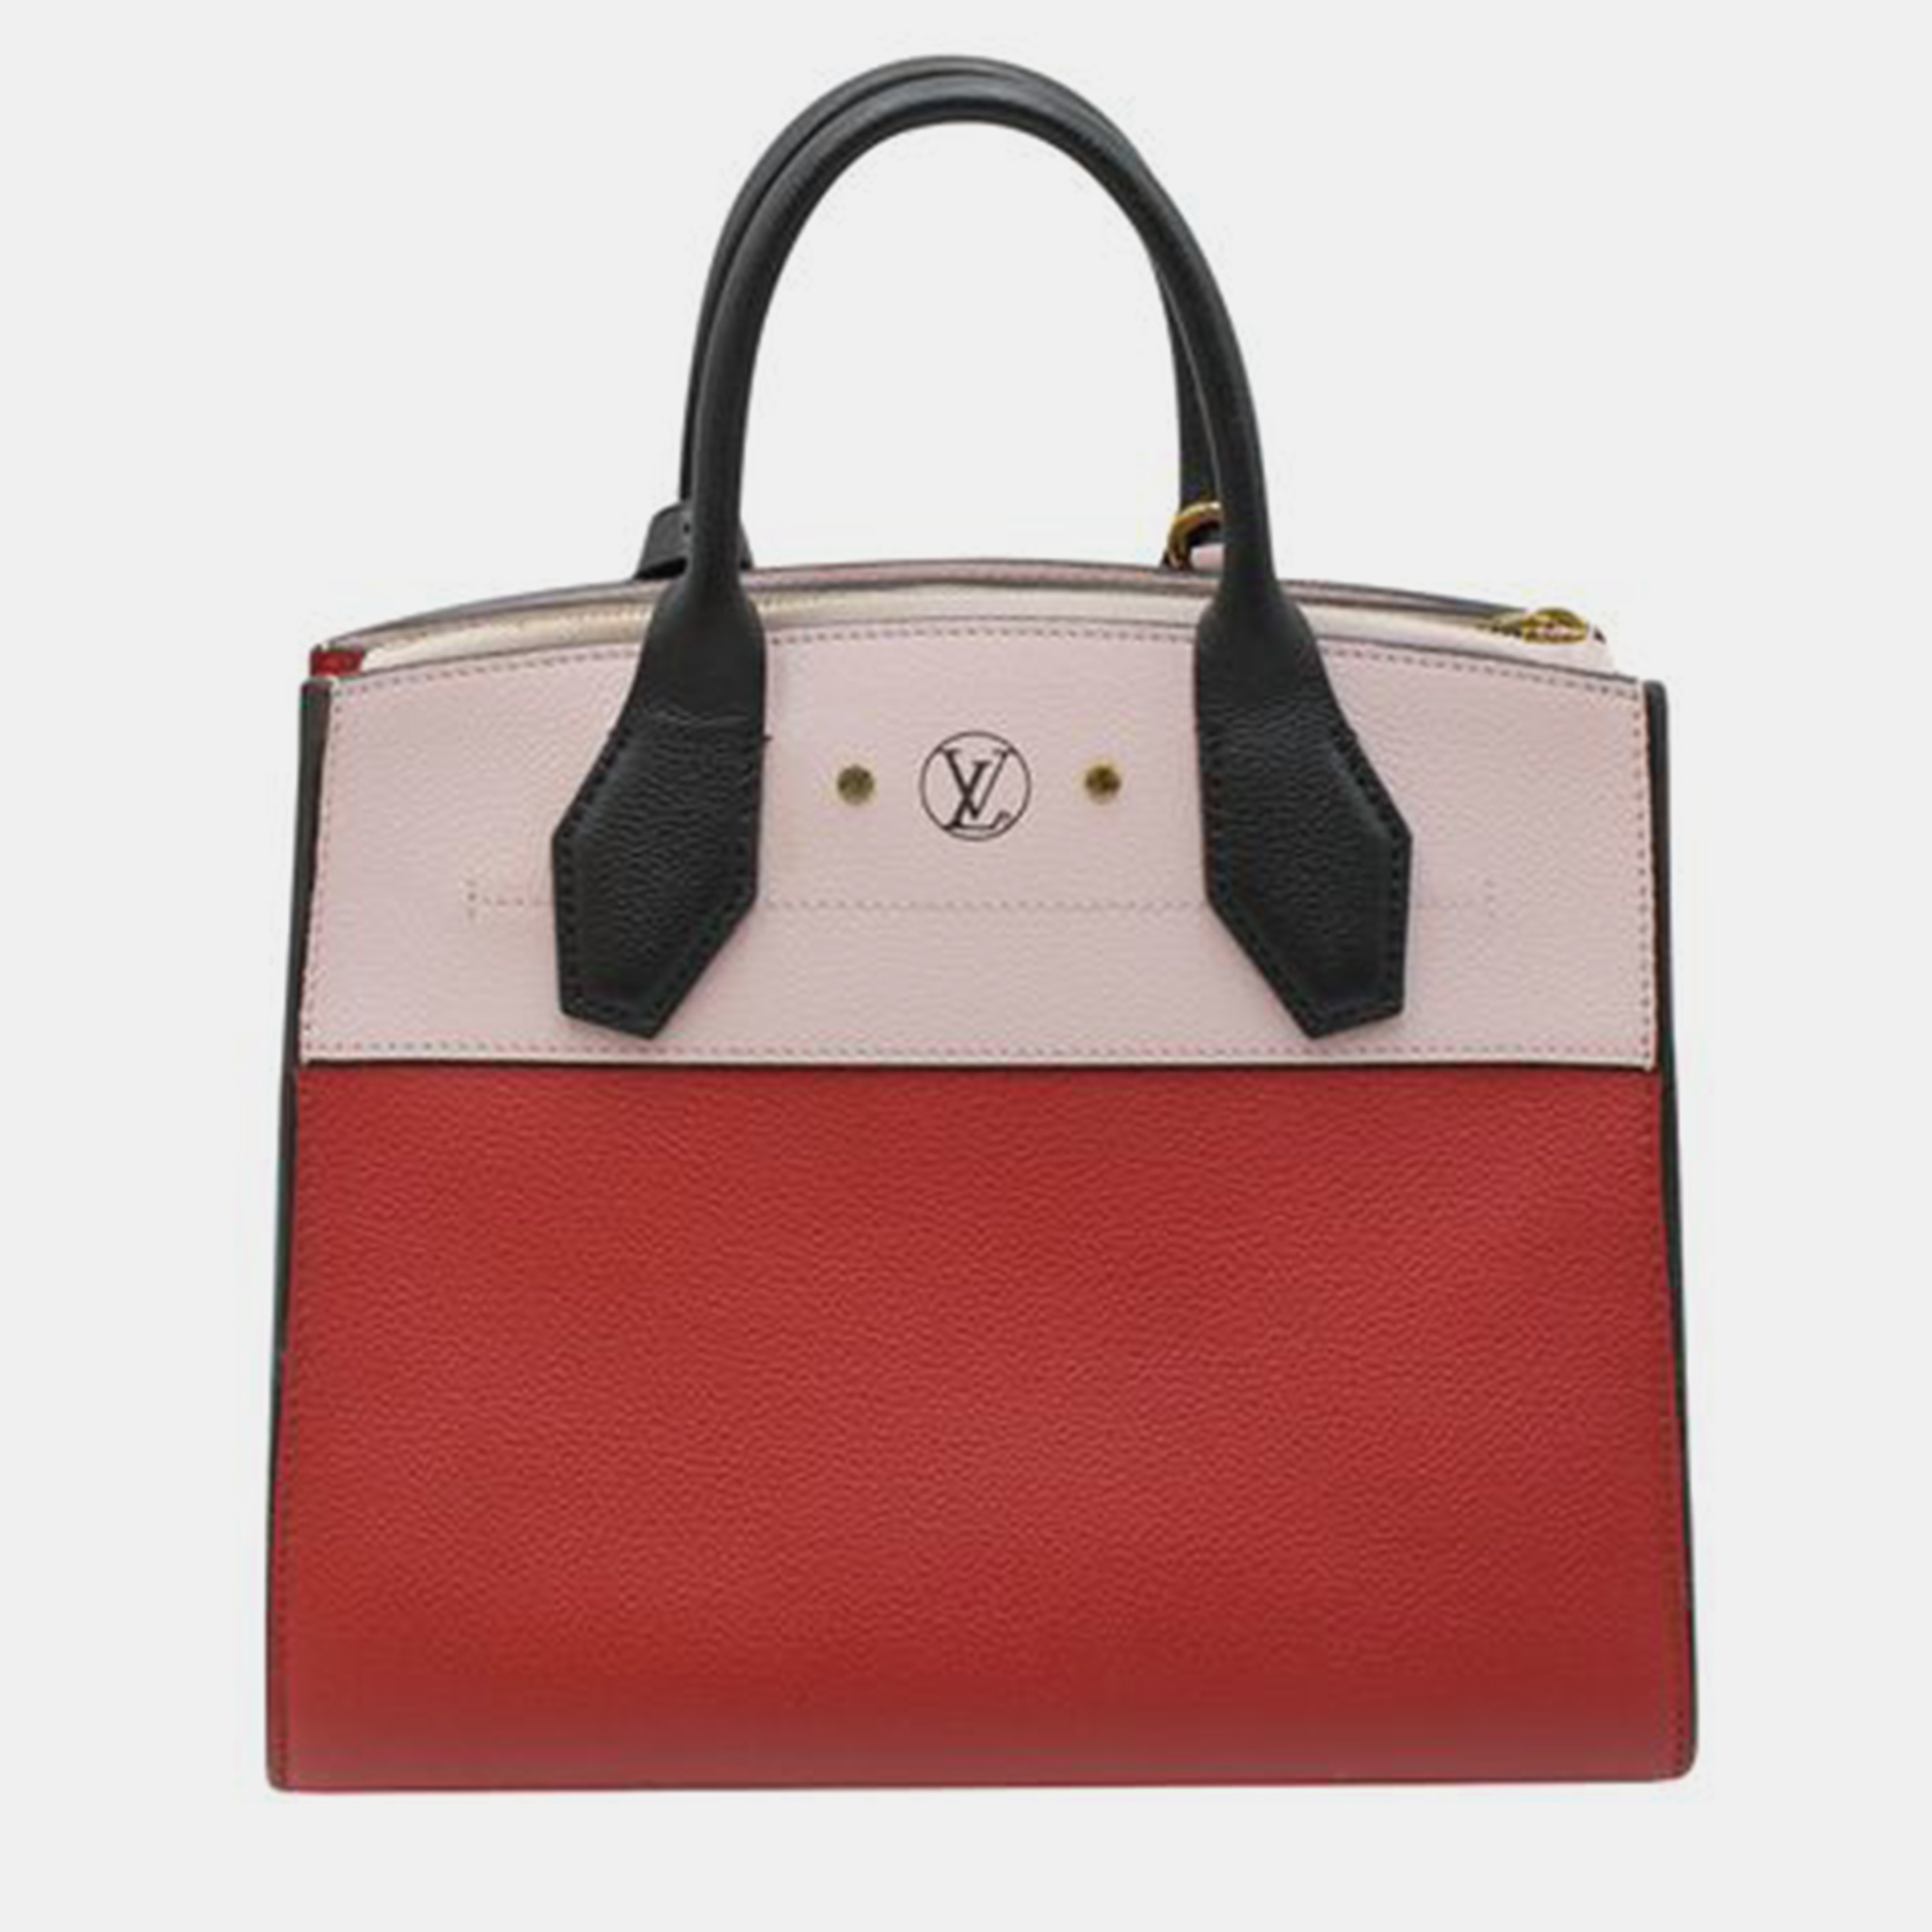 LOUIS VUITTON Red And Pale Pink City Steamer Hand Bag 2017 HANDBAGS